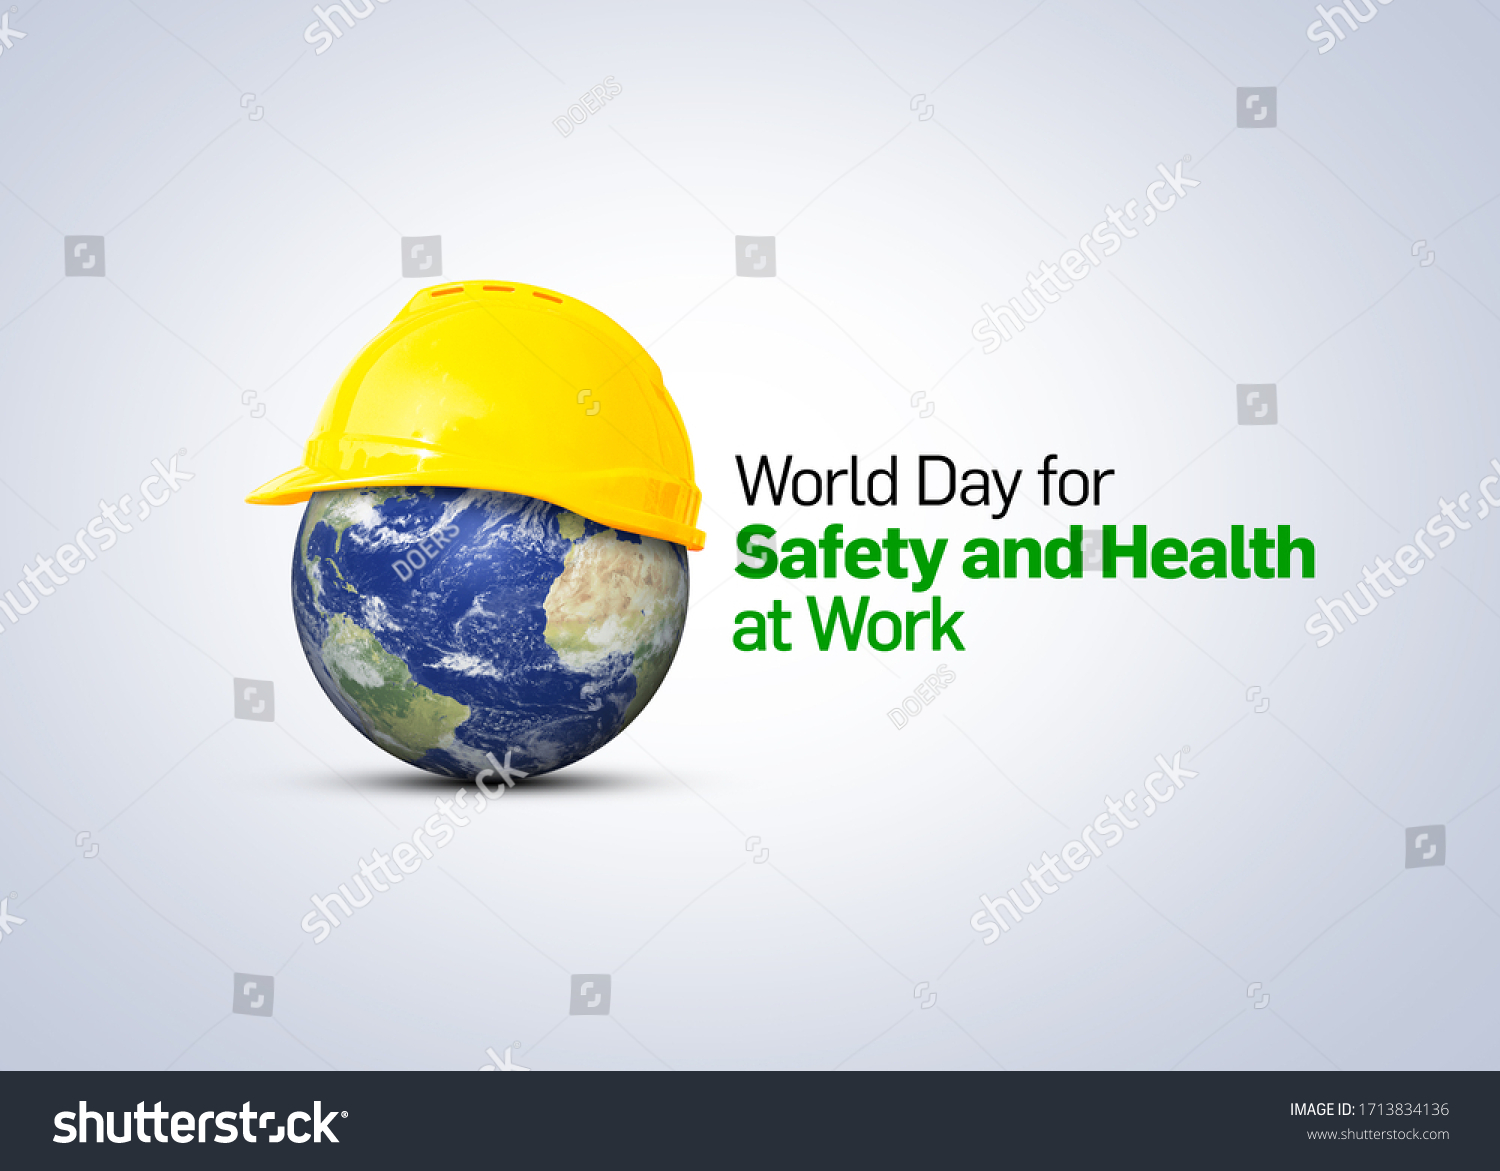 World Day for Safety and Health at Work concept.The planet Earth and the helmet symbol of safety and health at work place. Safety and Health at Work concept. #1713834136